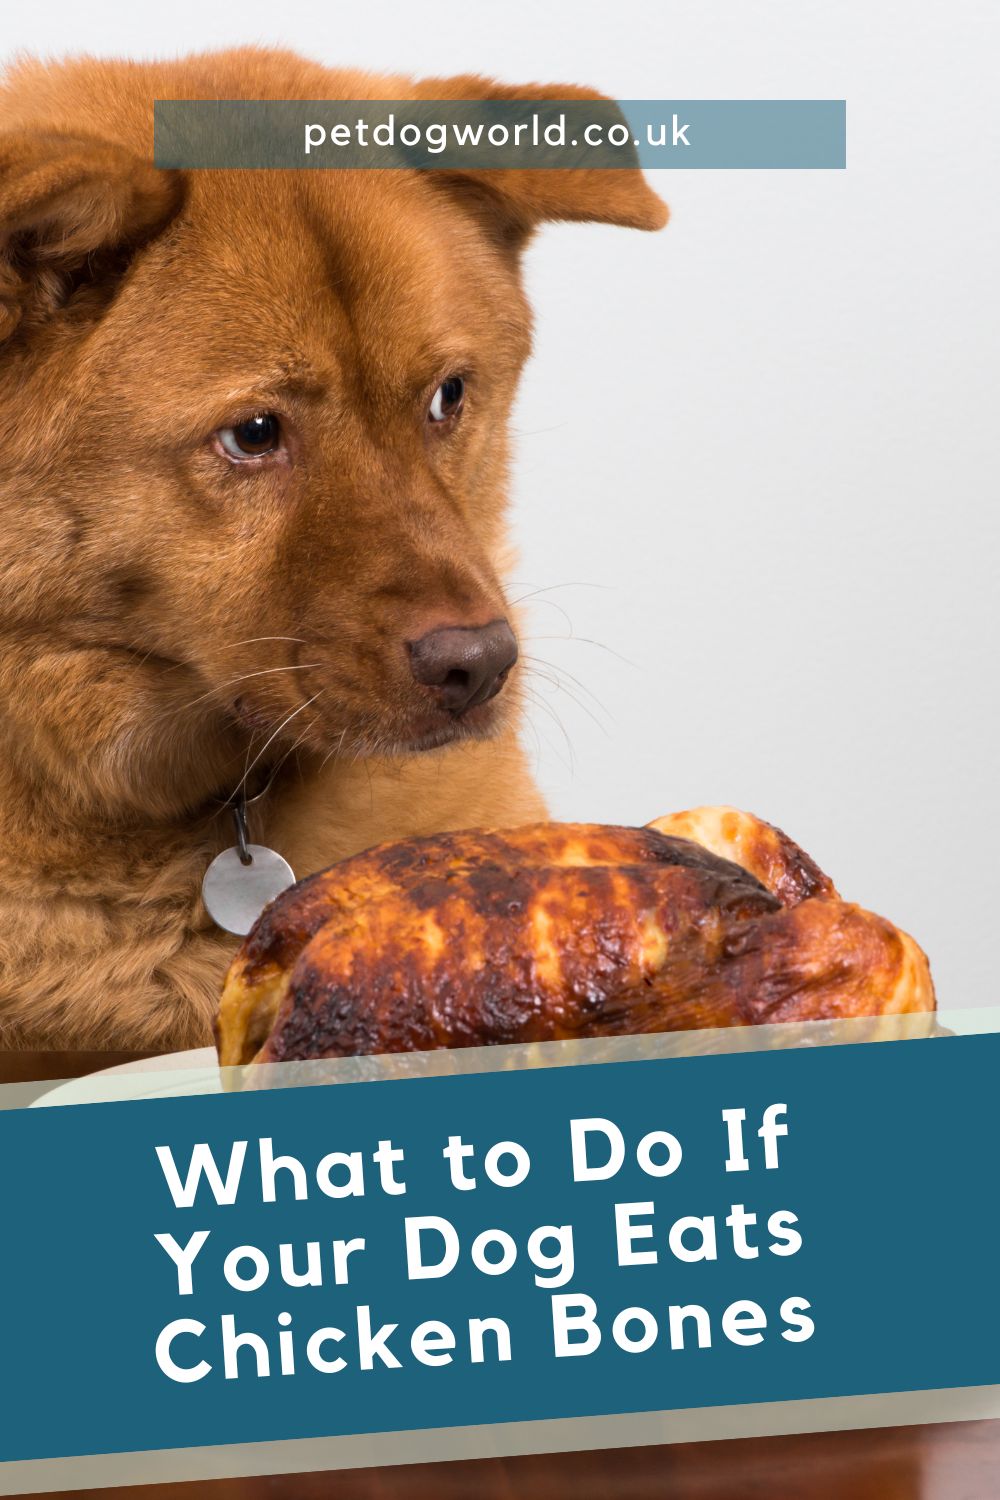 Find out what to do if your dog eats chicken bones. Learn immediate actions, monitoring tips, and preventive measures to keep your dog safe.